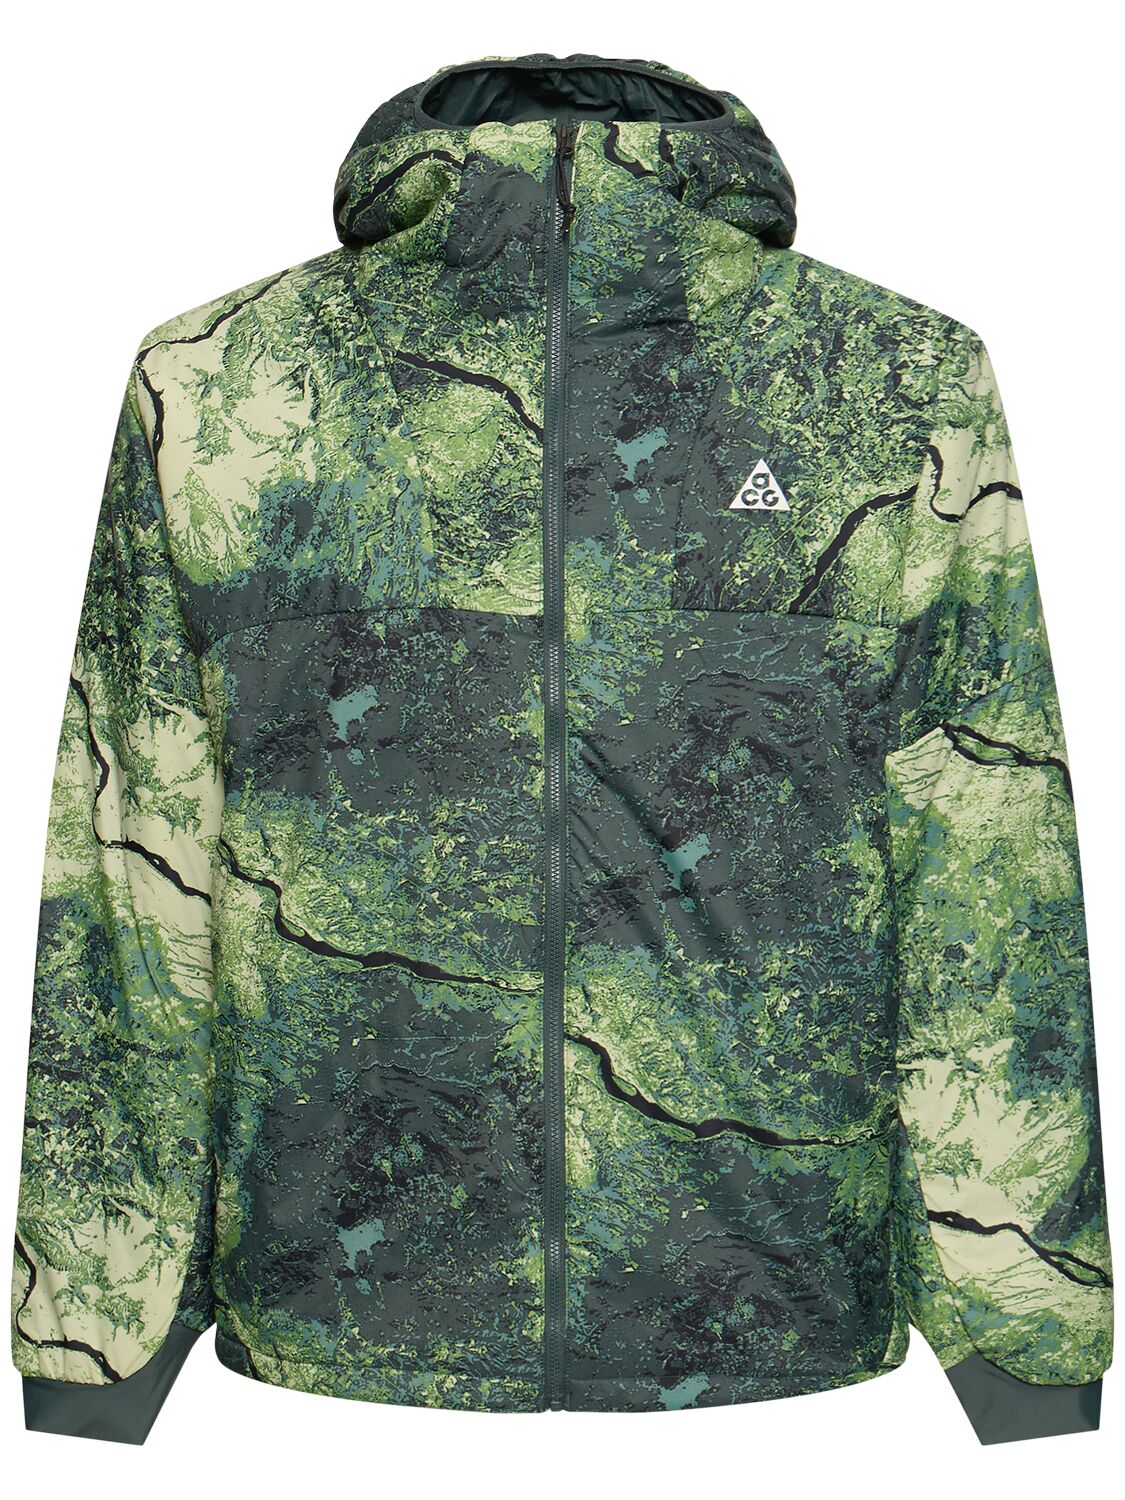 Image of Acg Therma-fit Adv Allover Print Jacket